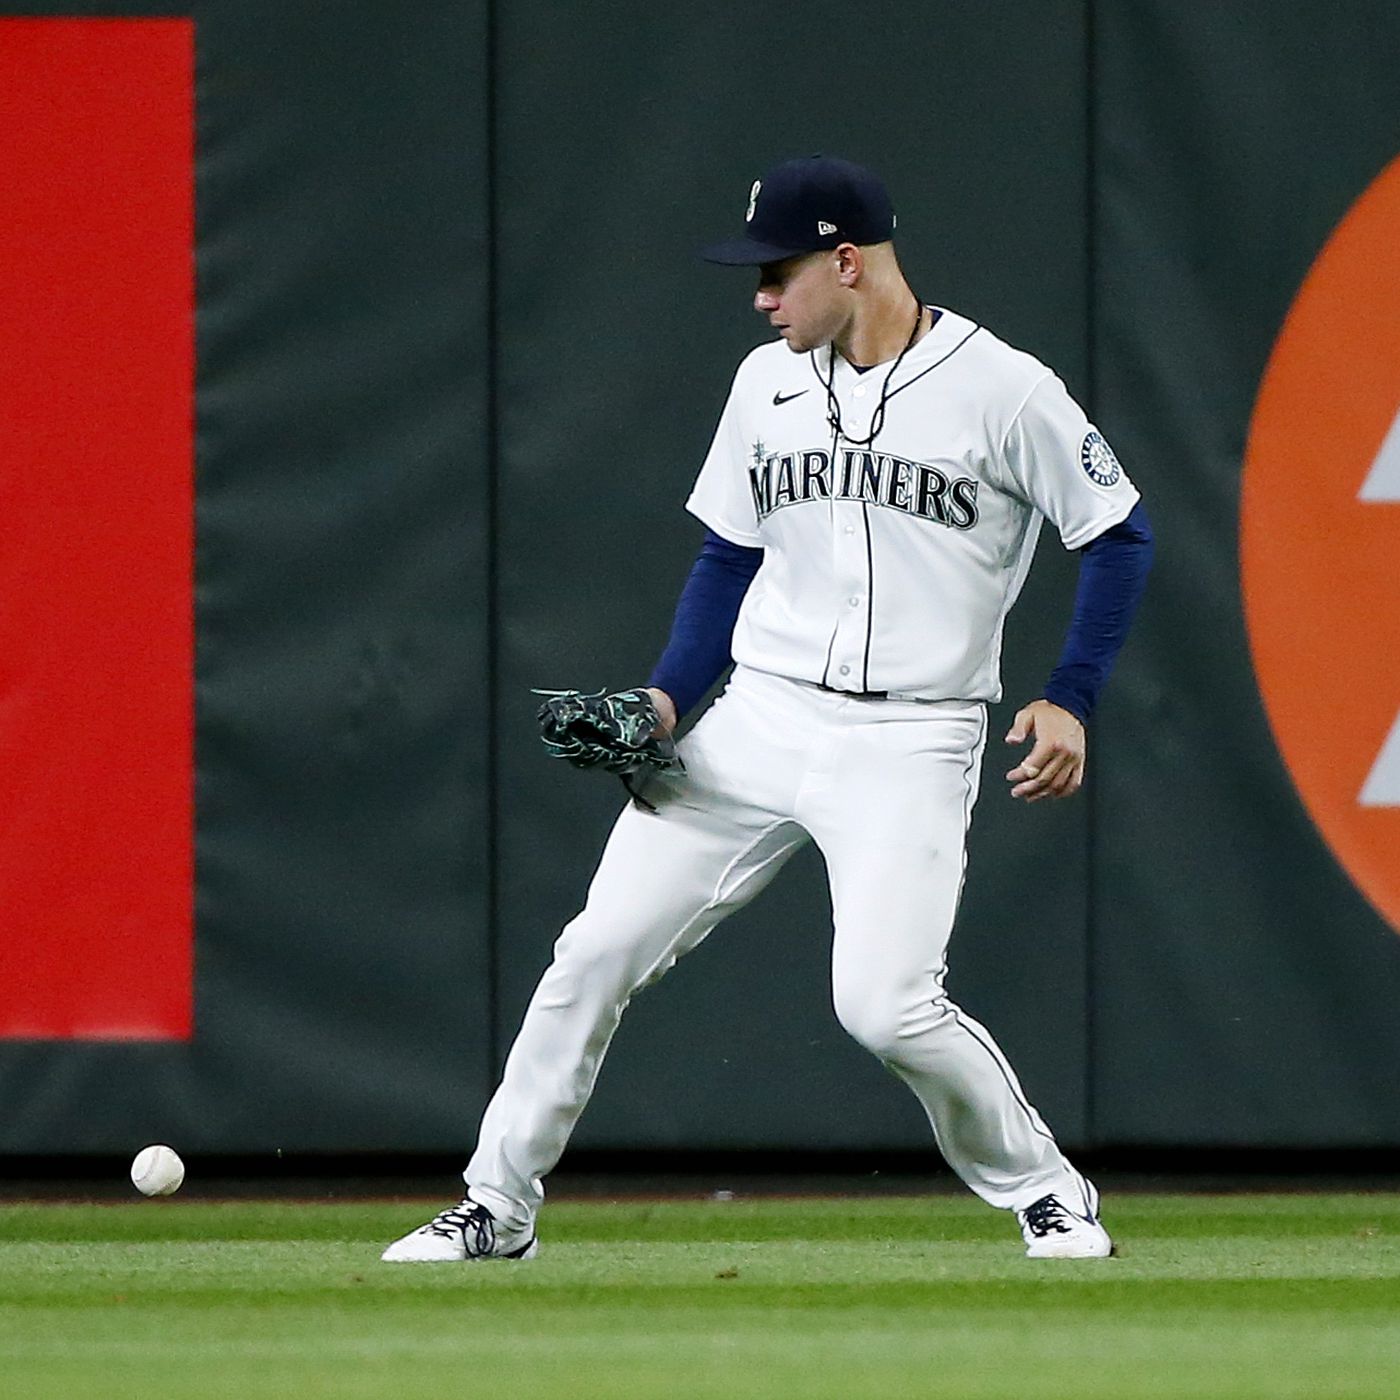 Adam Frazier brings something the Mariners haven't had at second